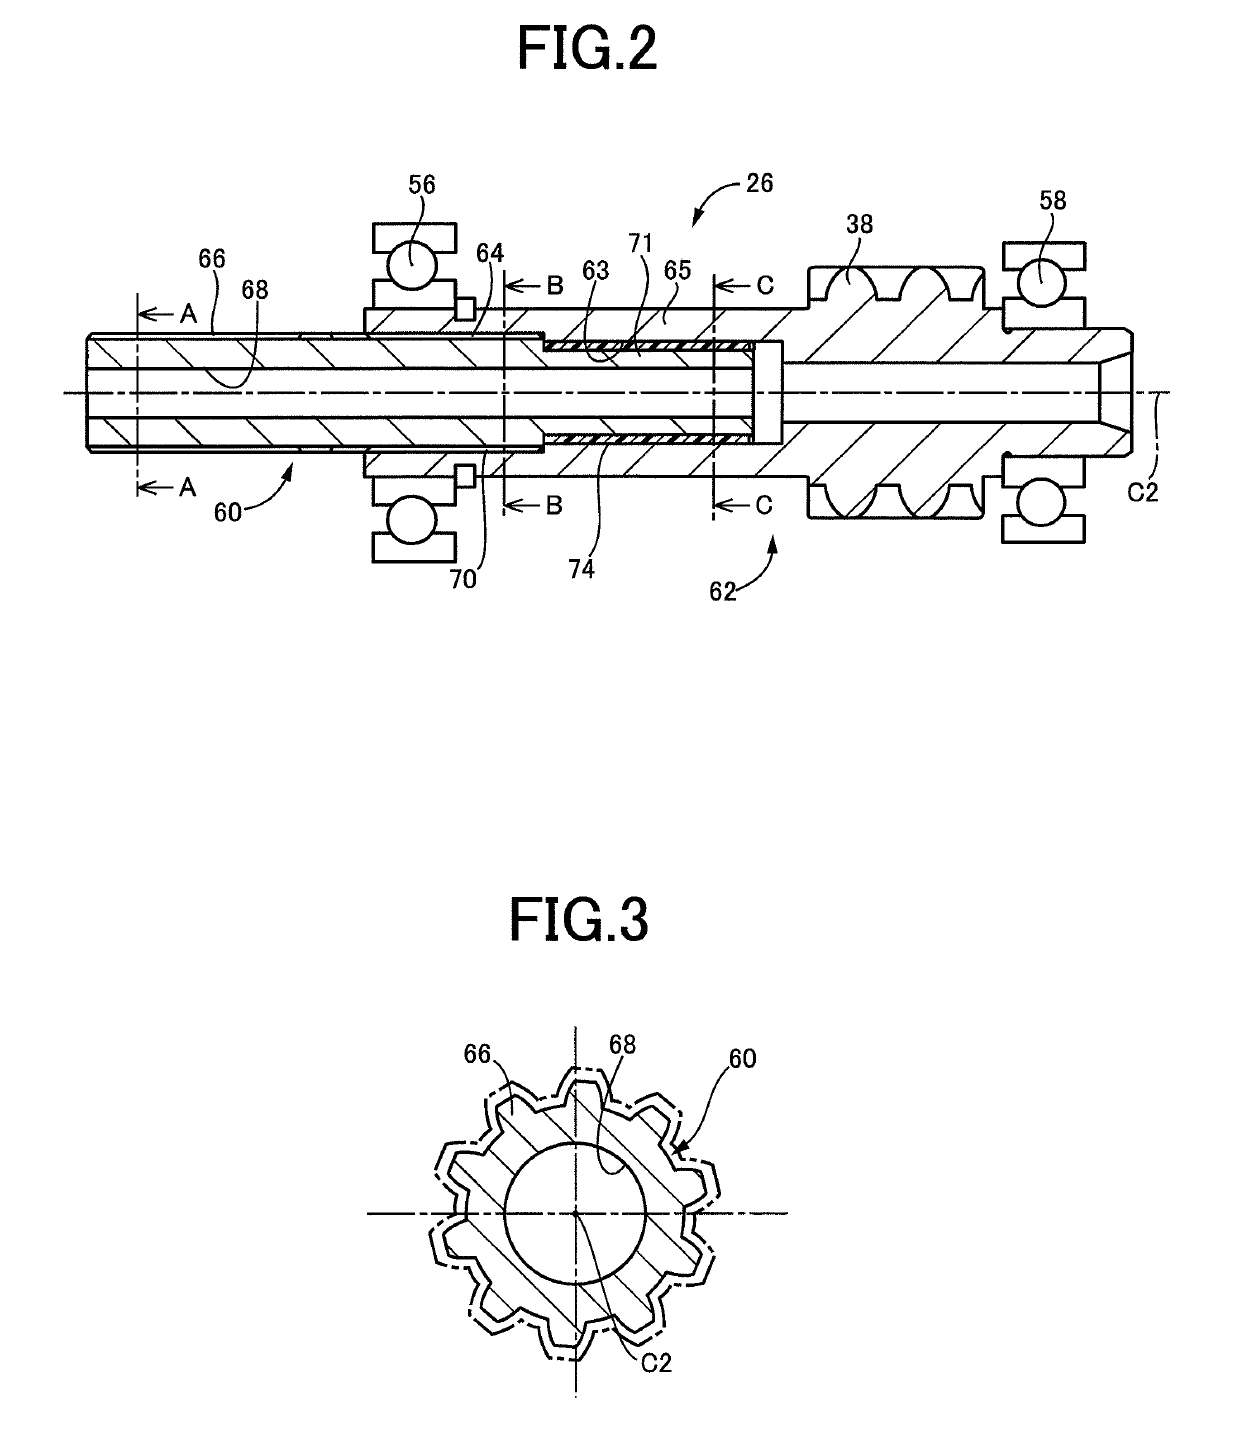 Support structure for rotating shafts of vehicle